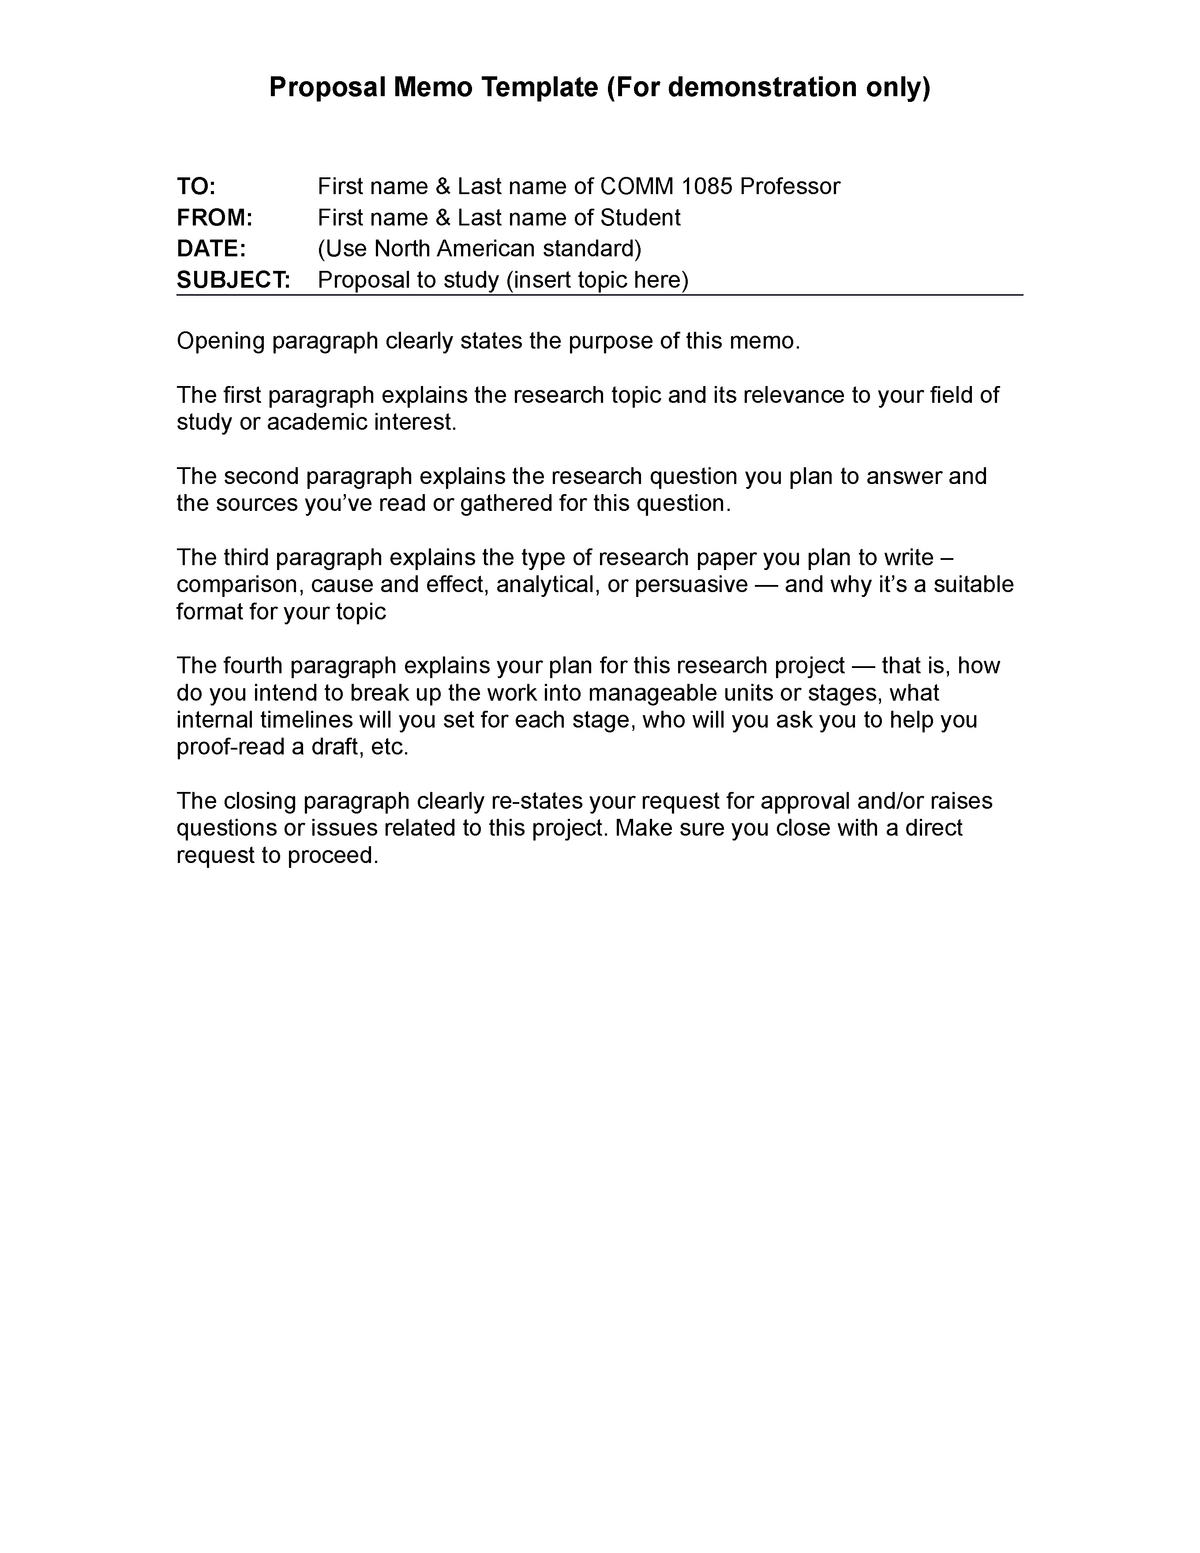 Week 8 Writing Task 4 Proposal Memo Template (For demonstration only